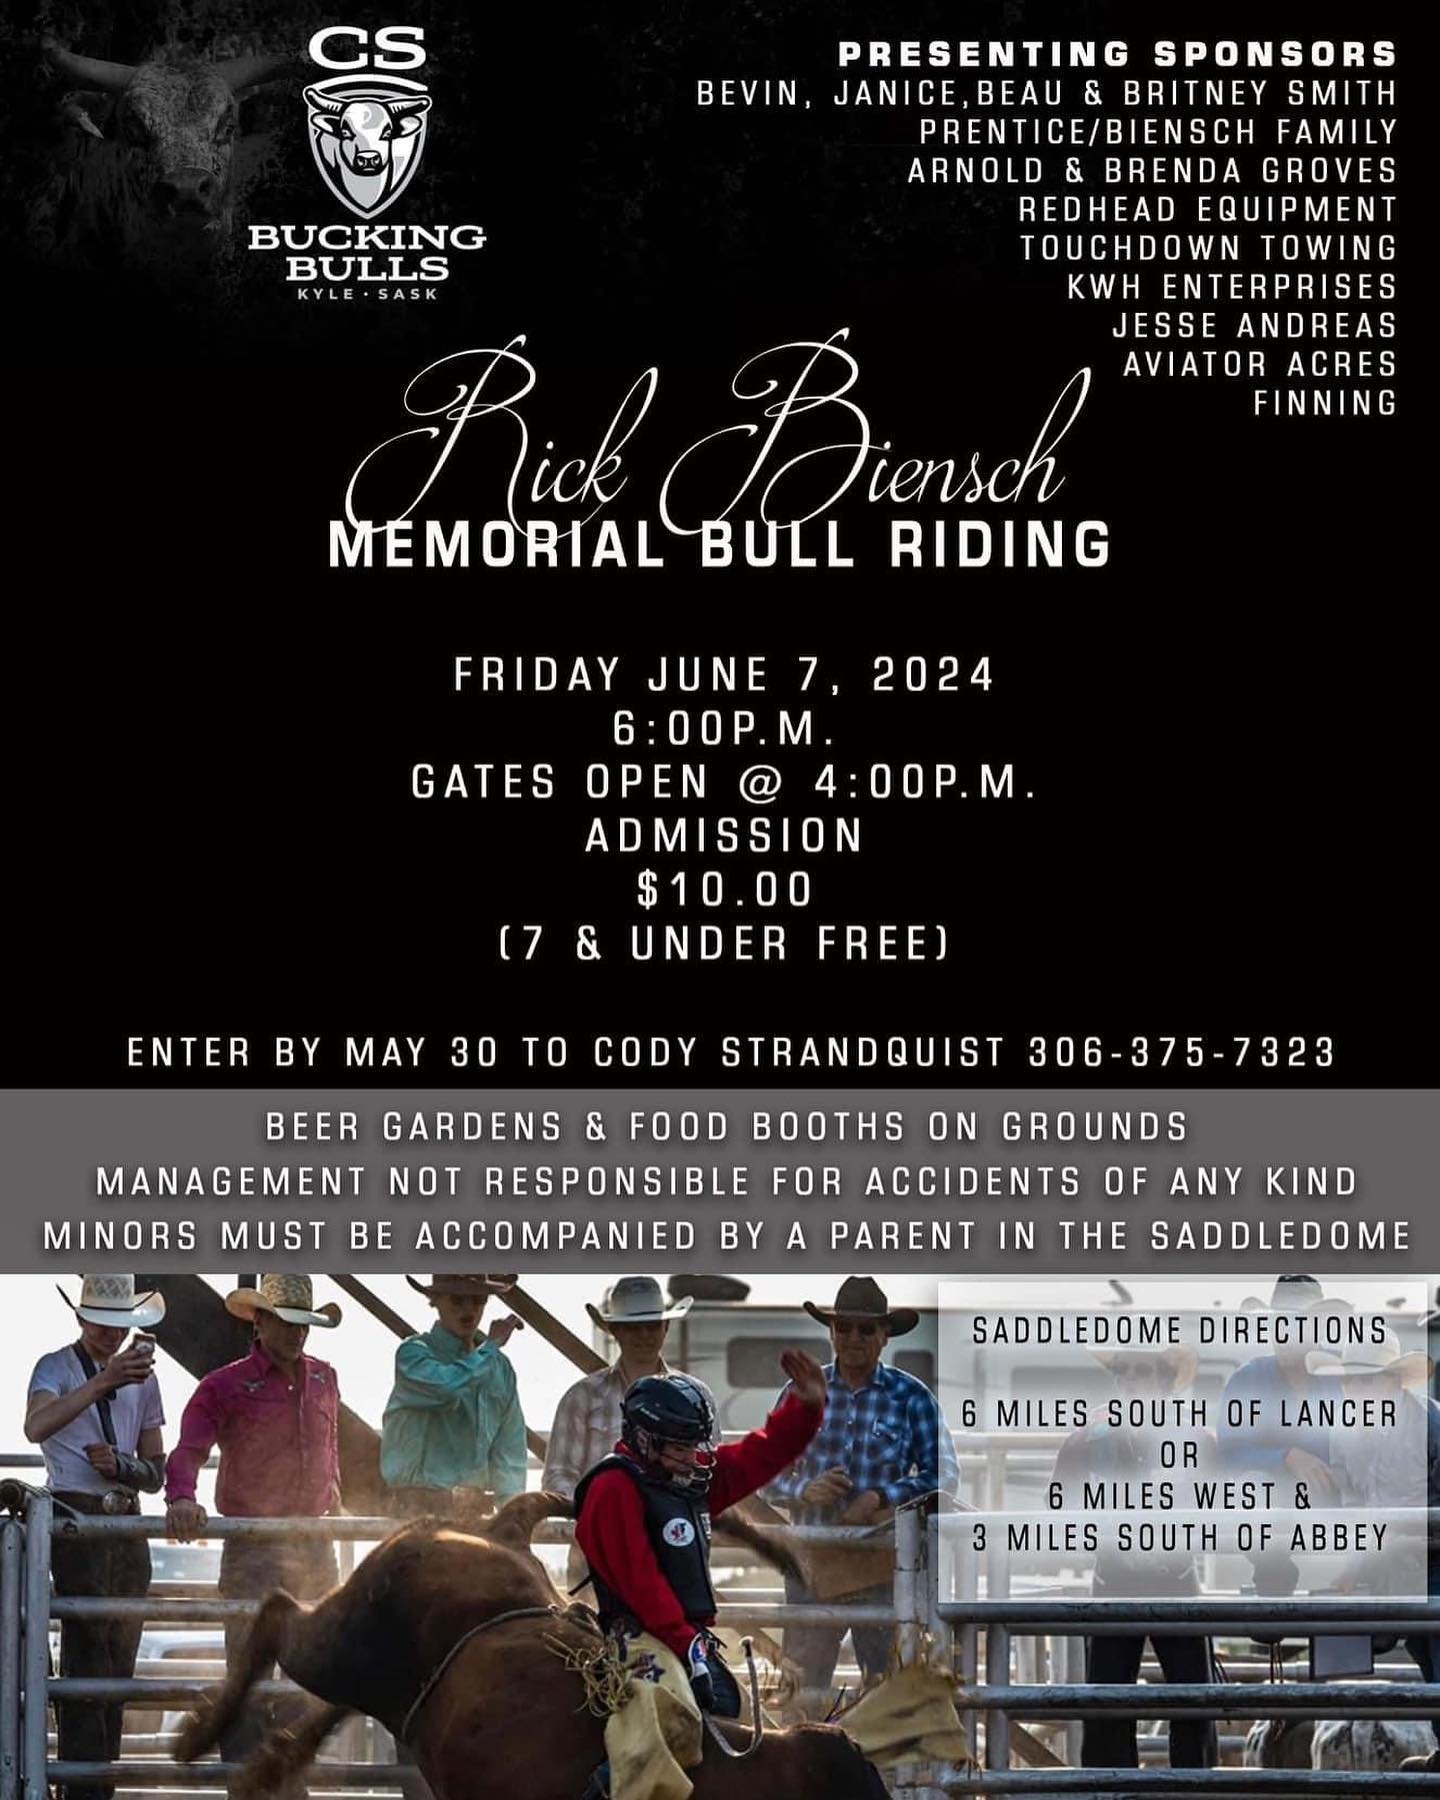 Just under one month till we kick off rodeo weekend friday night with the Rick Biensch Memorial Bull Riding ! Can&rsquo;t wait to see everyone there for a great night of bull riding action!!